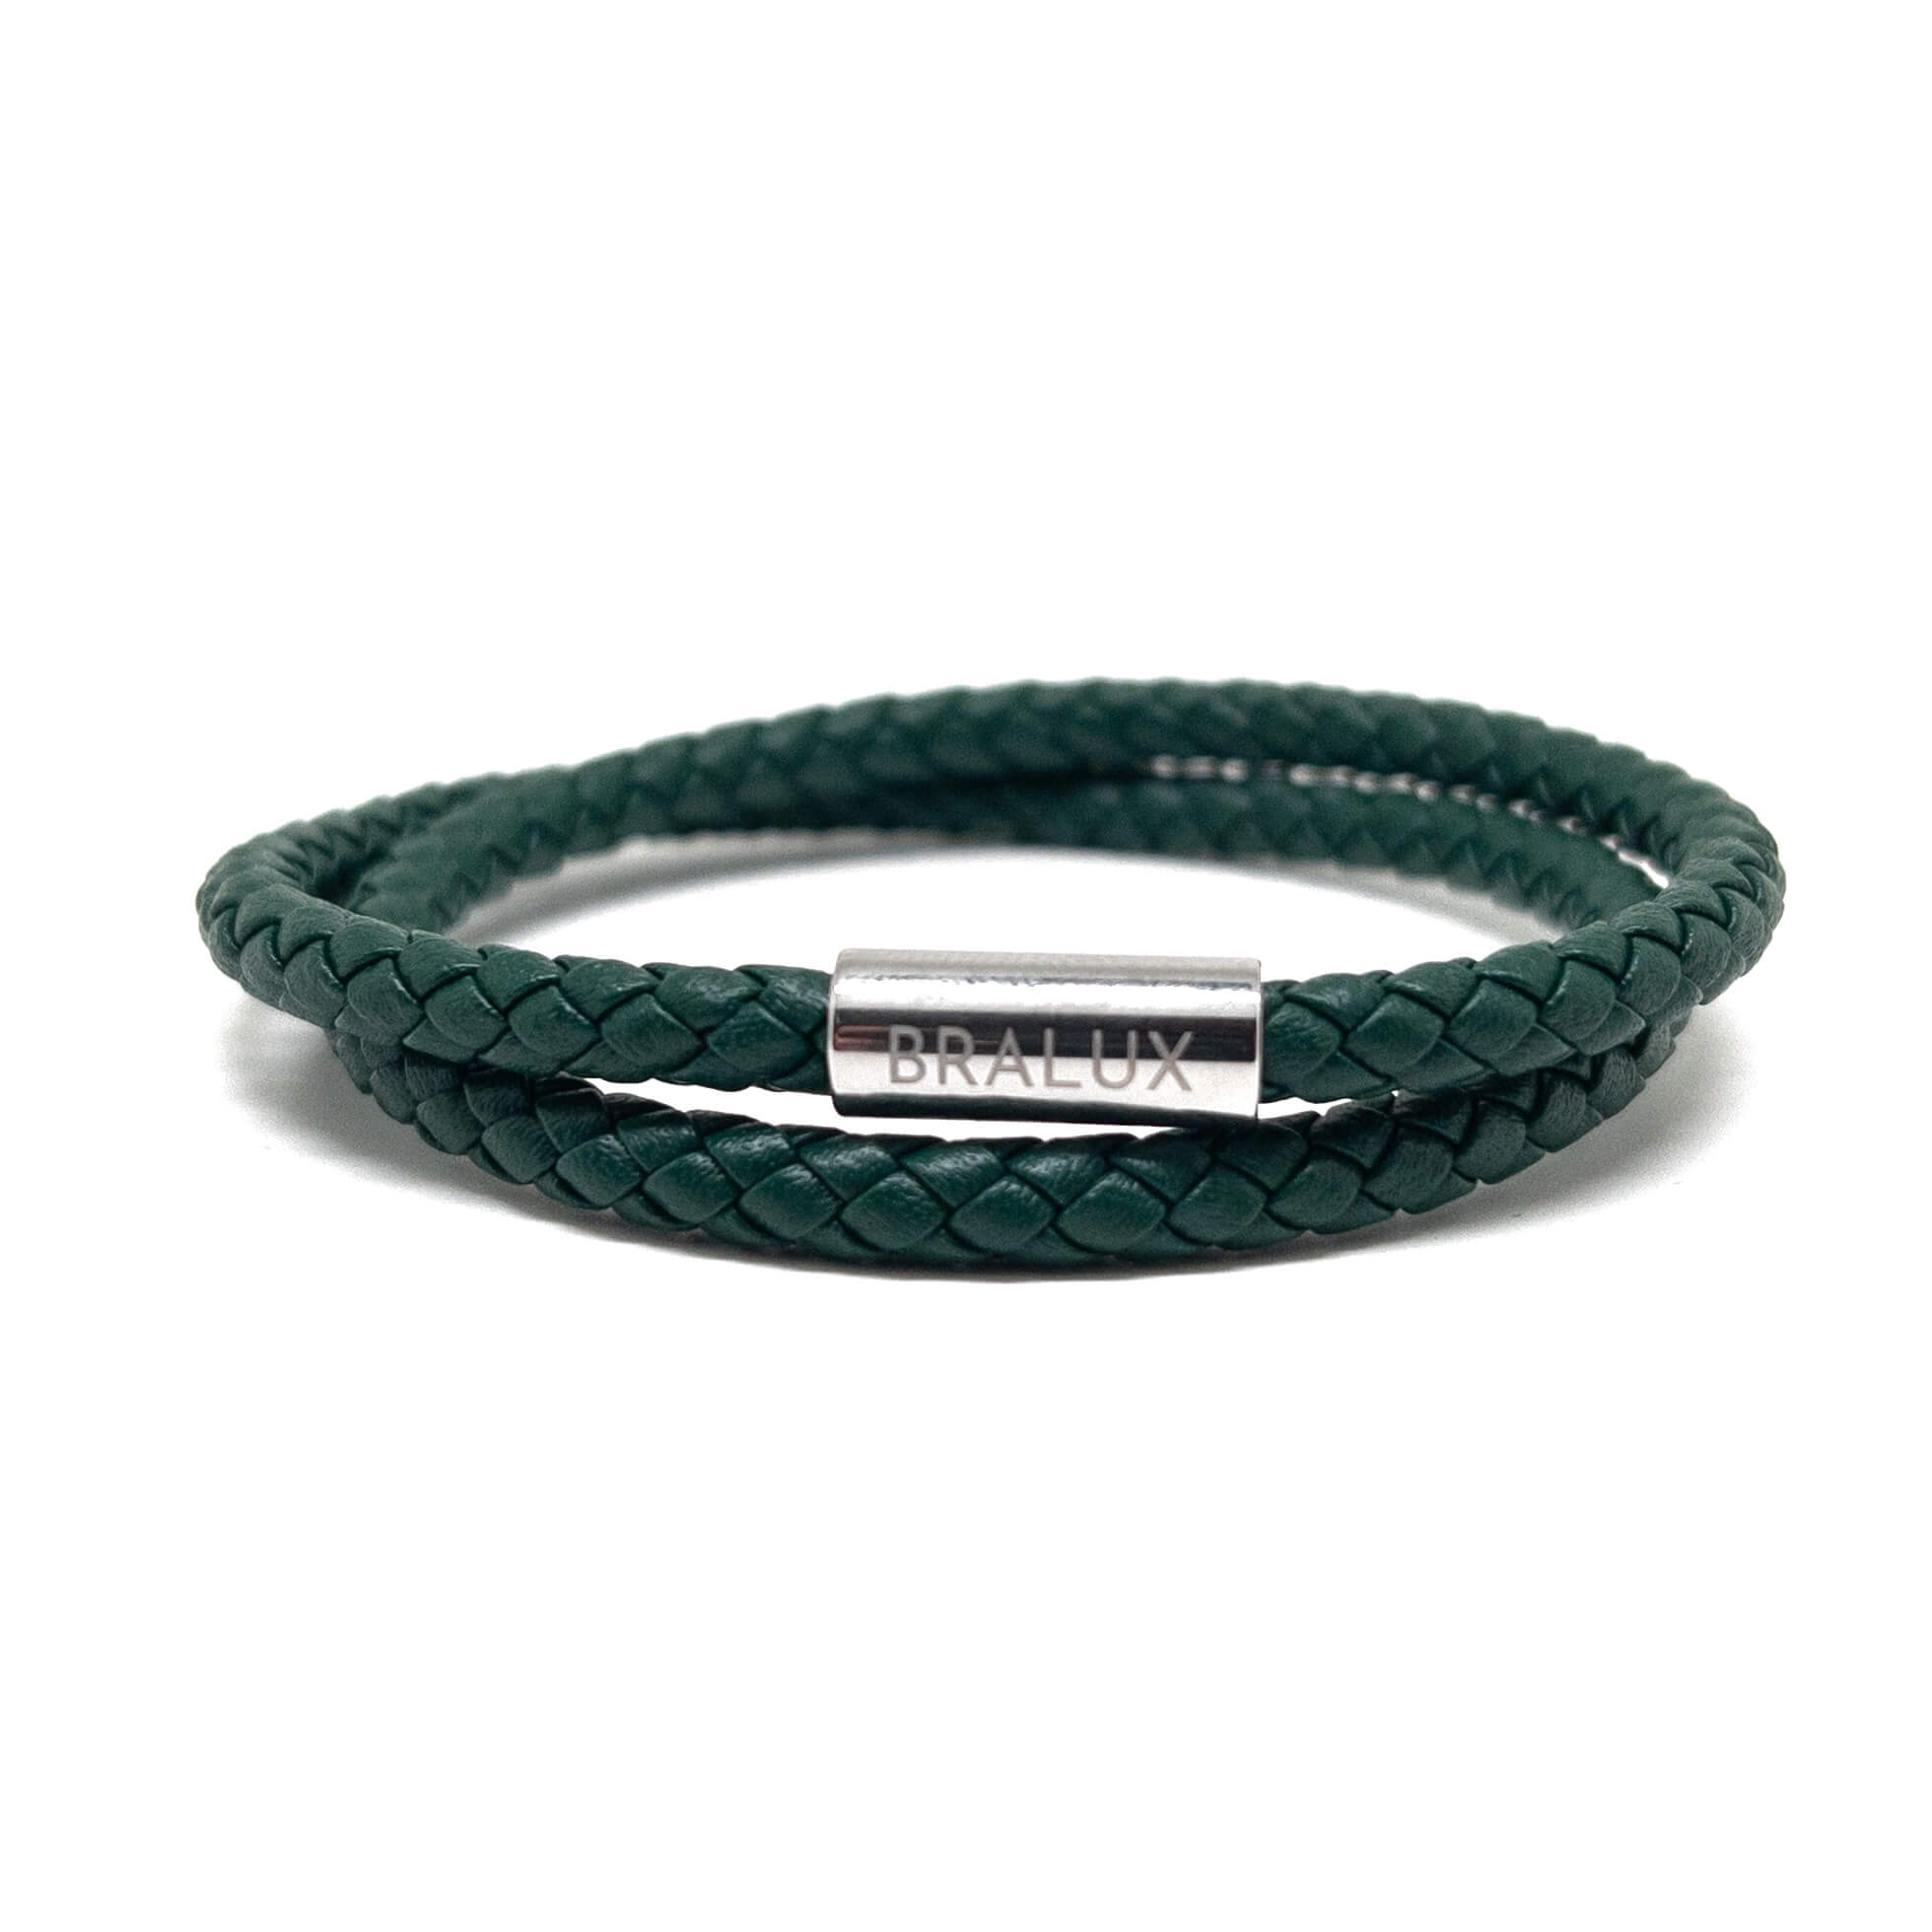 The Green Duo Leather Bracelet